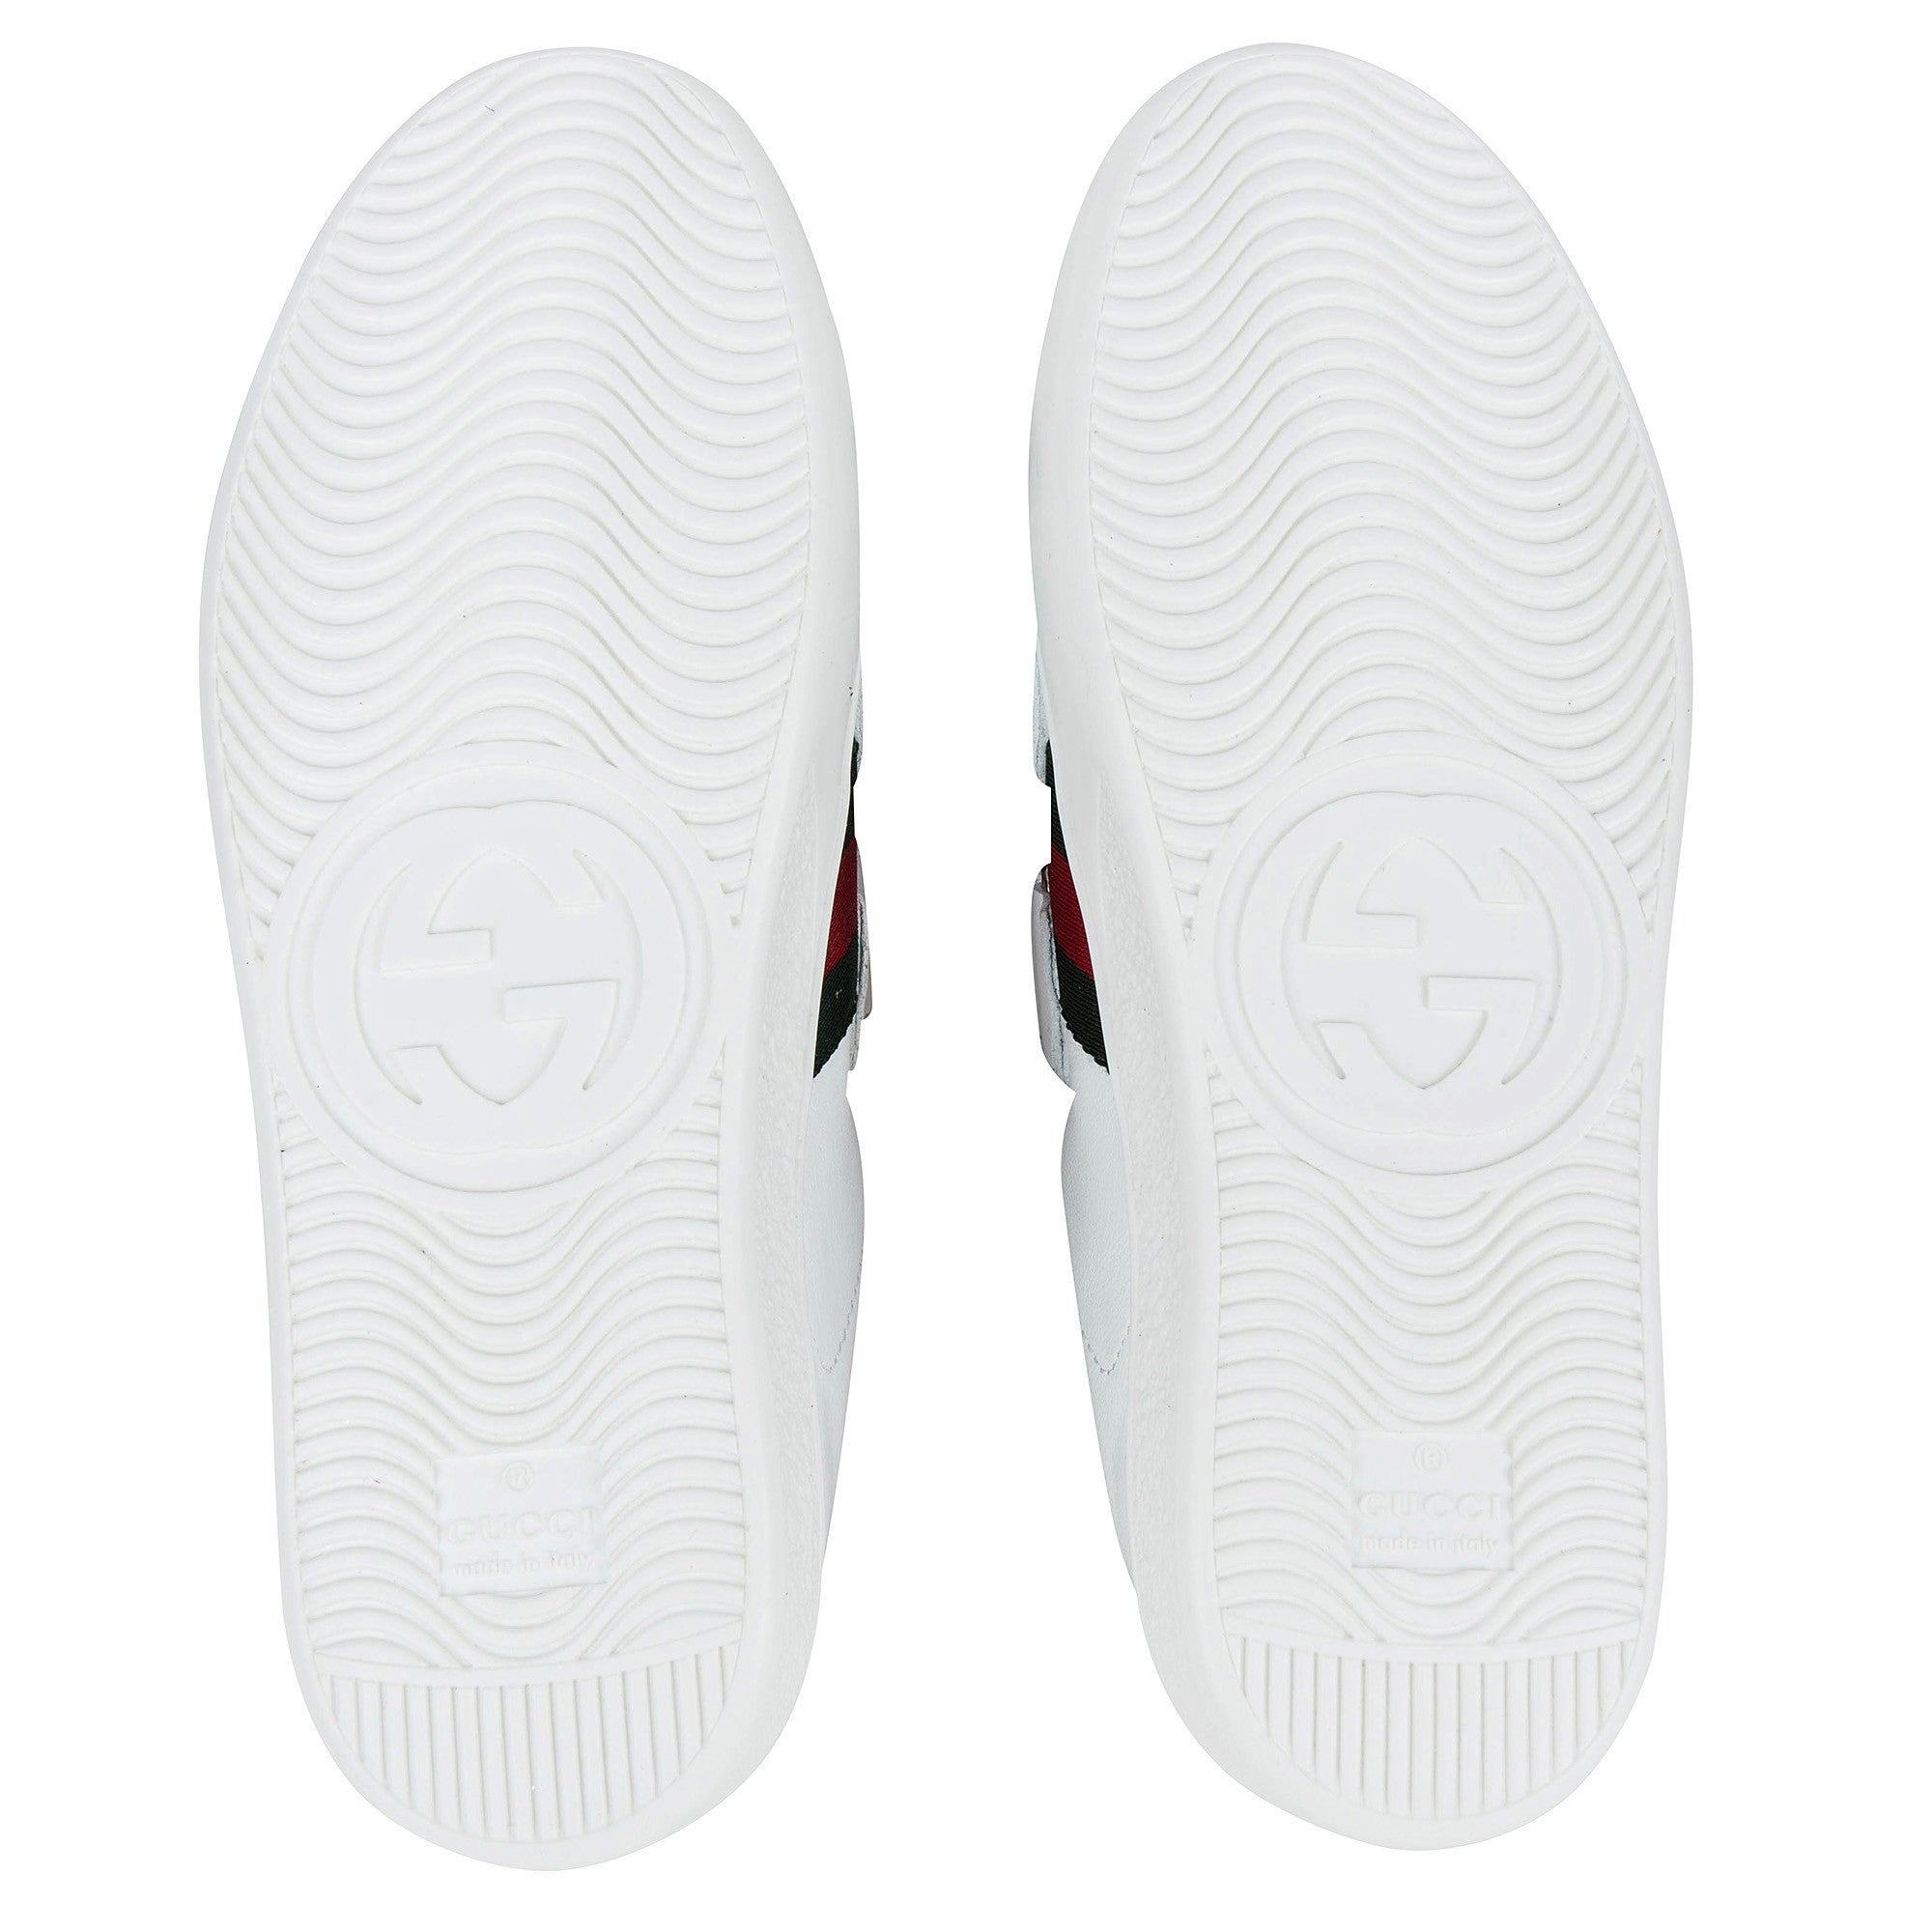 Boys & Girls White Leather Trainers